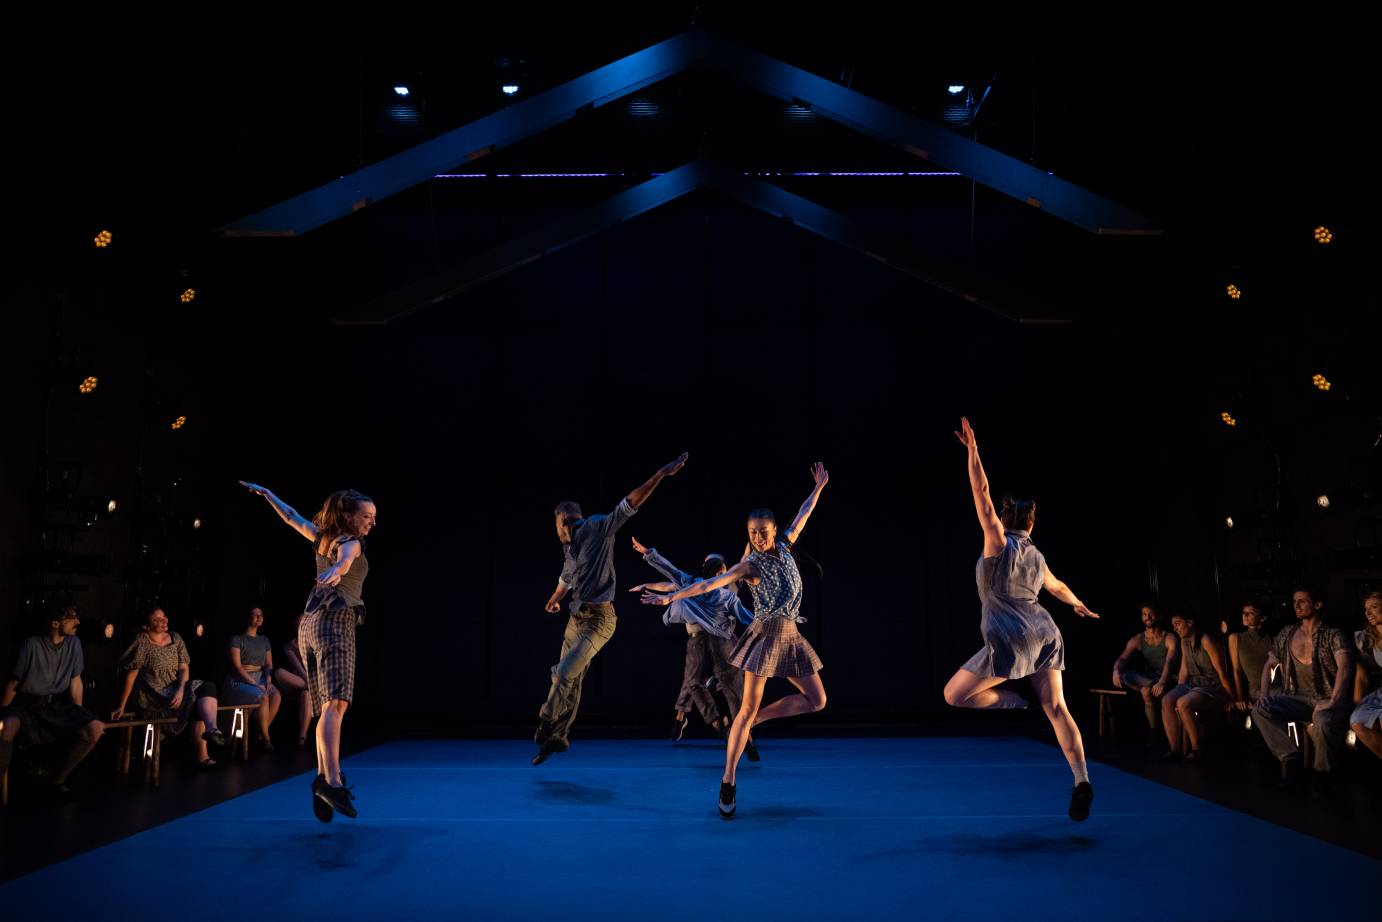 a group of of 5 dancers jump in the air, their arms outstretched. They are having fun while on either side of them groups of friends sitting on benches watch. 